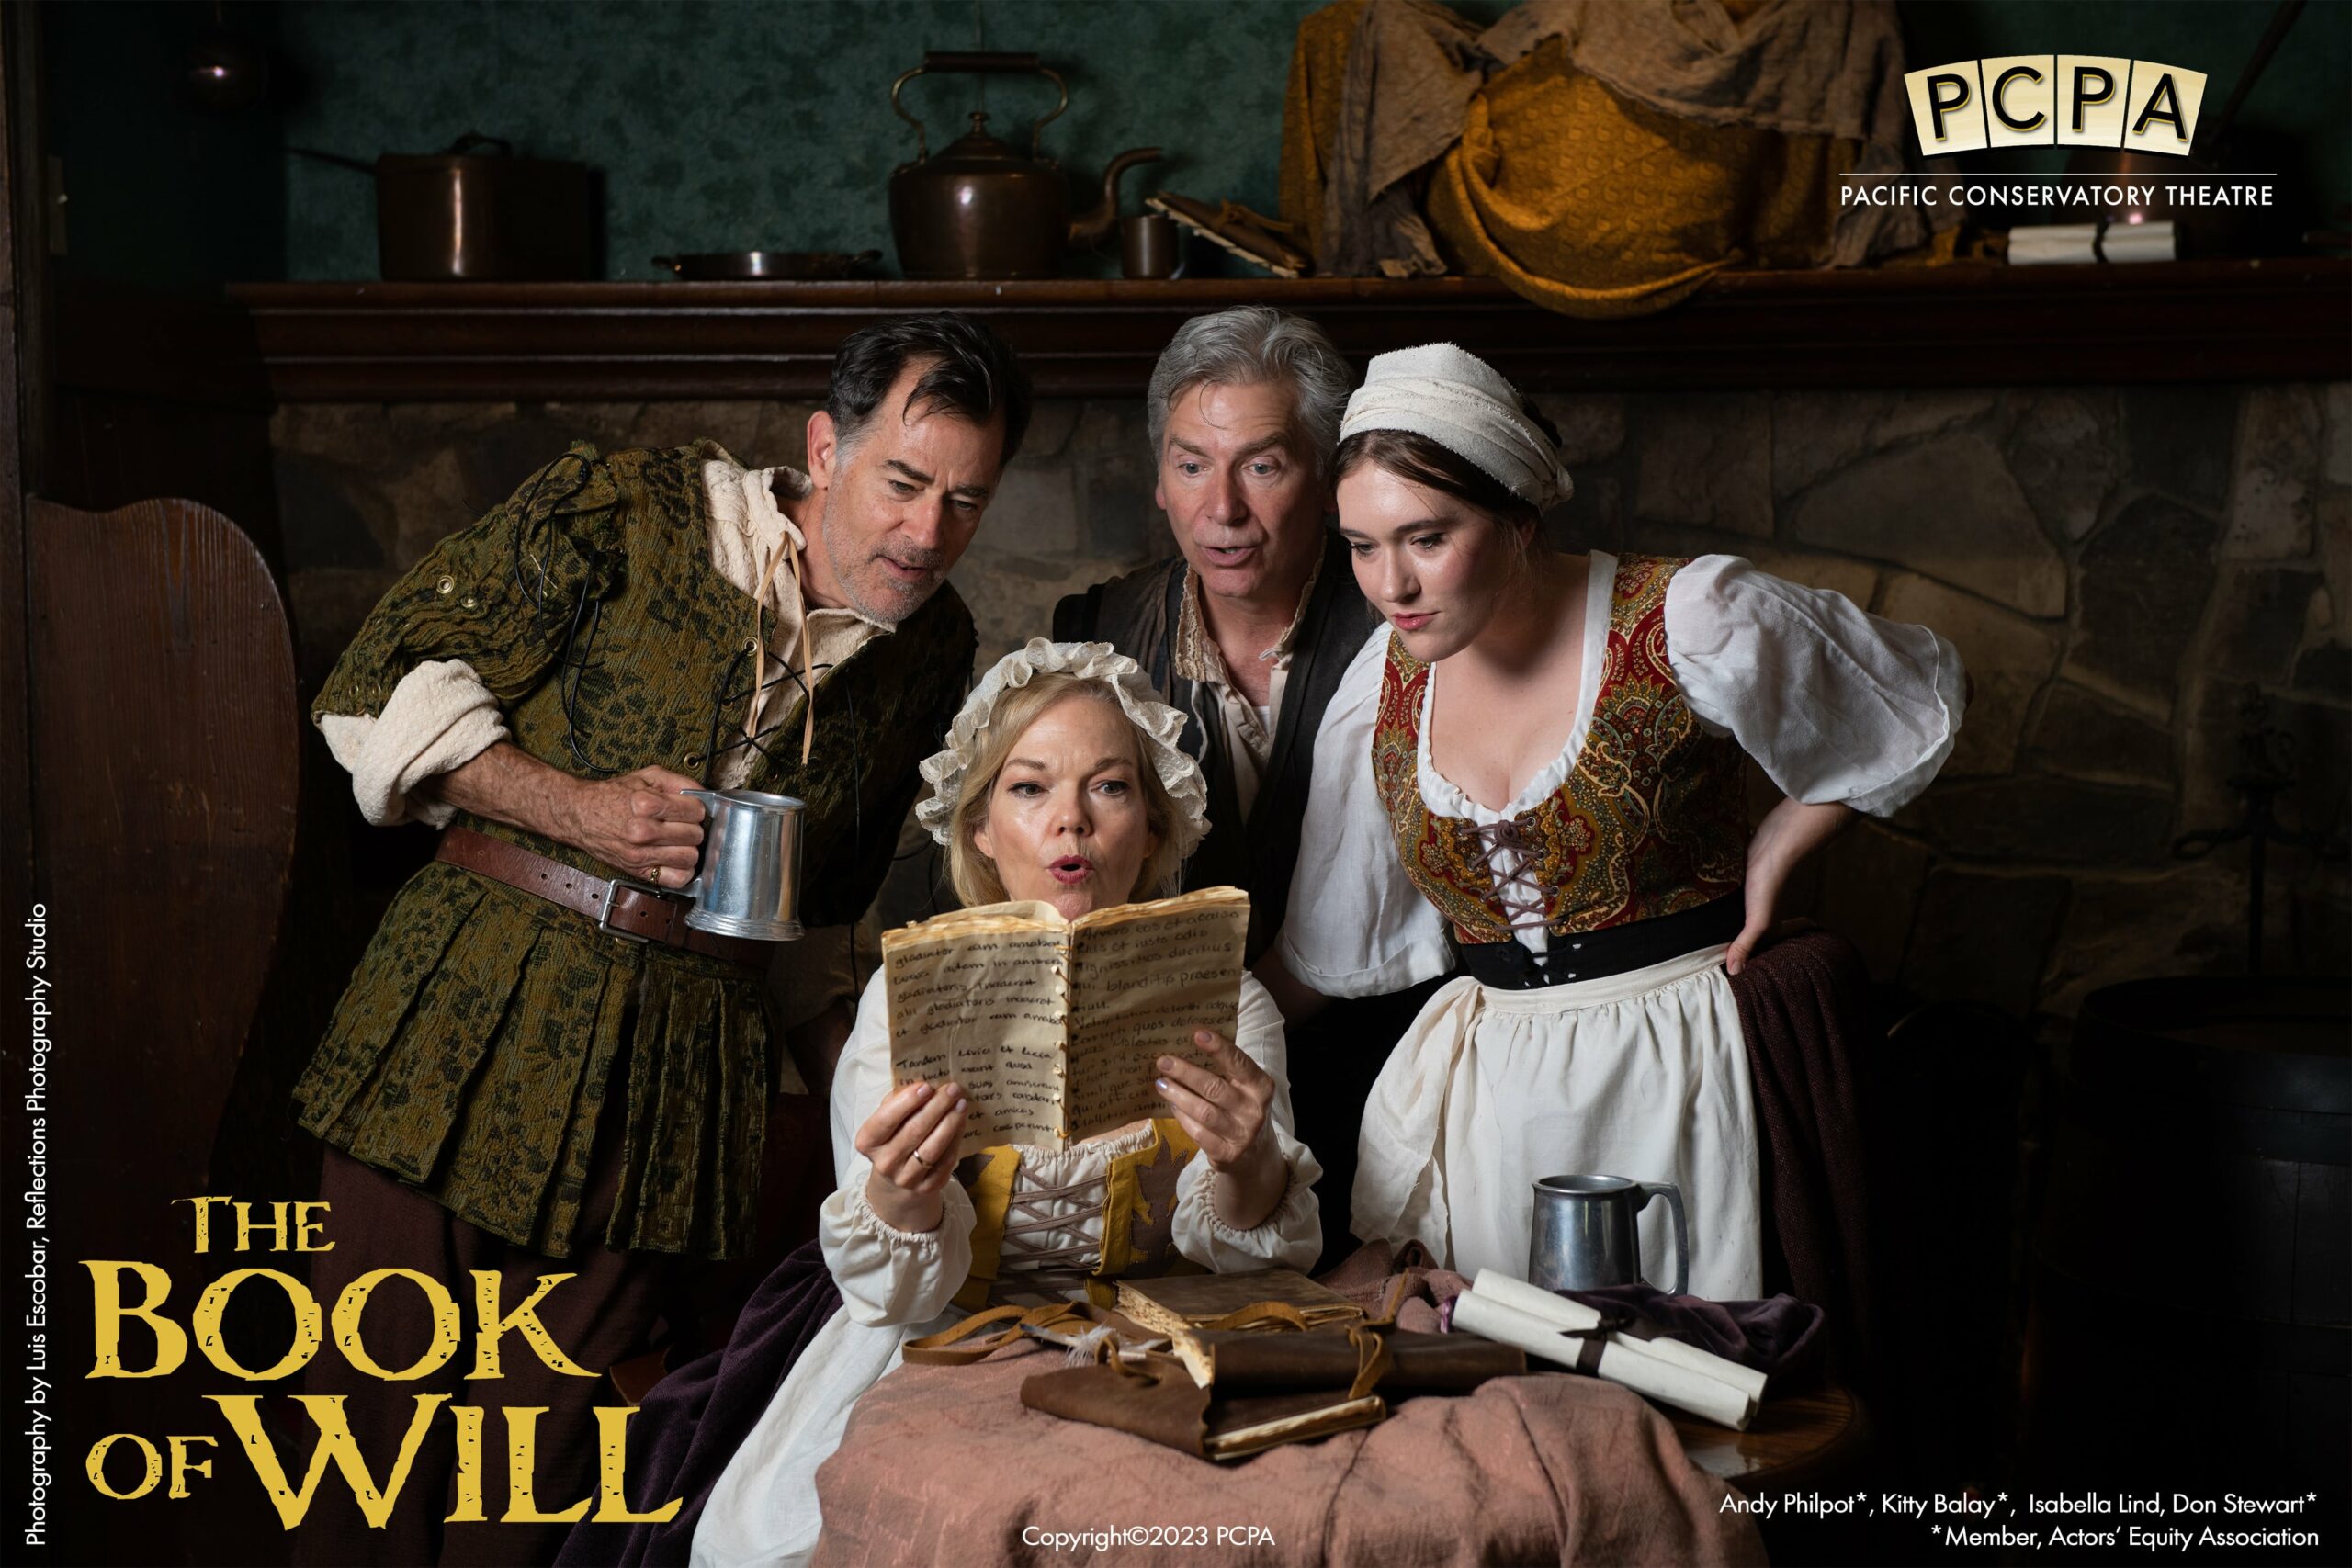 The Book of Will cast looking at book